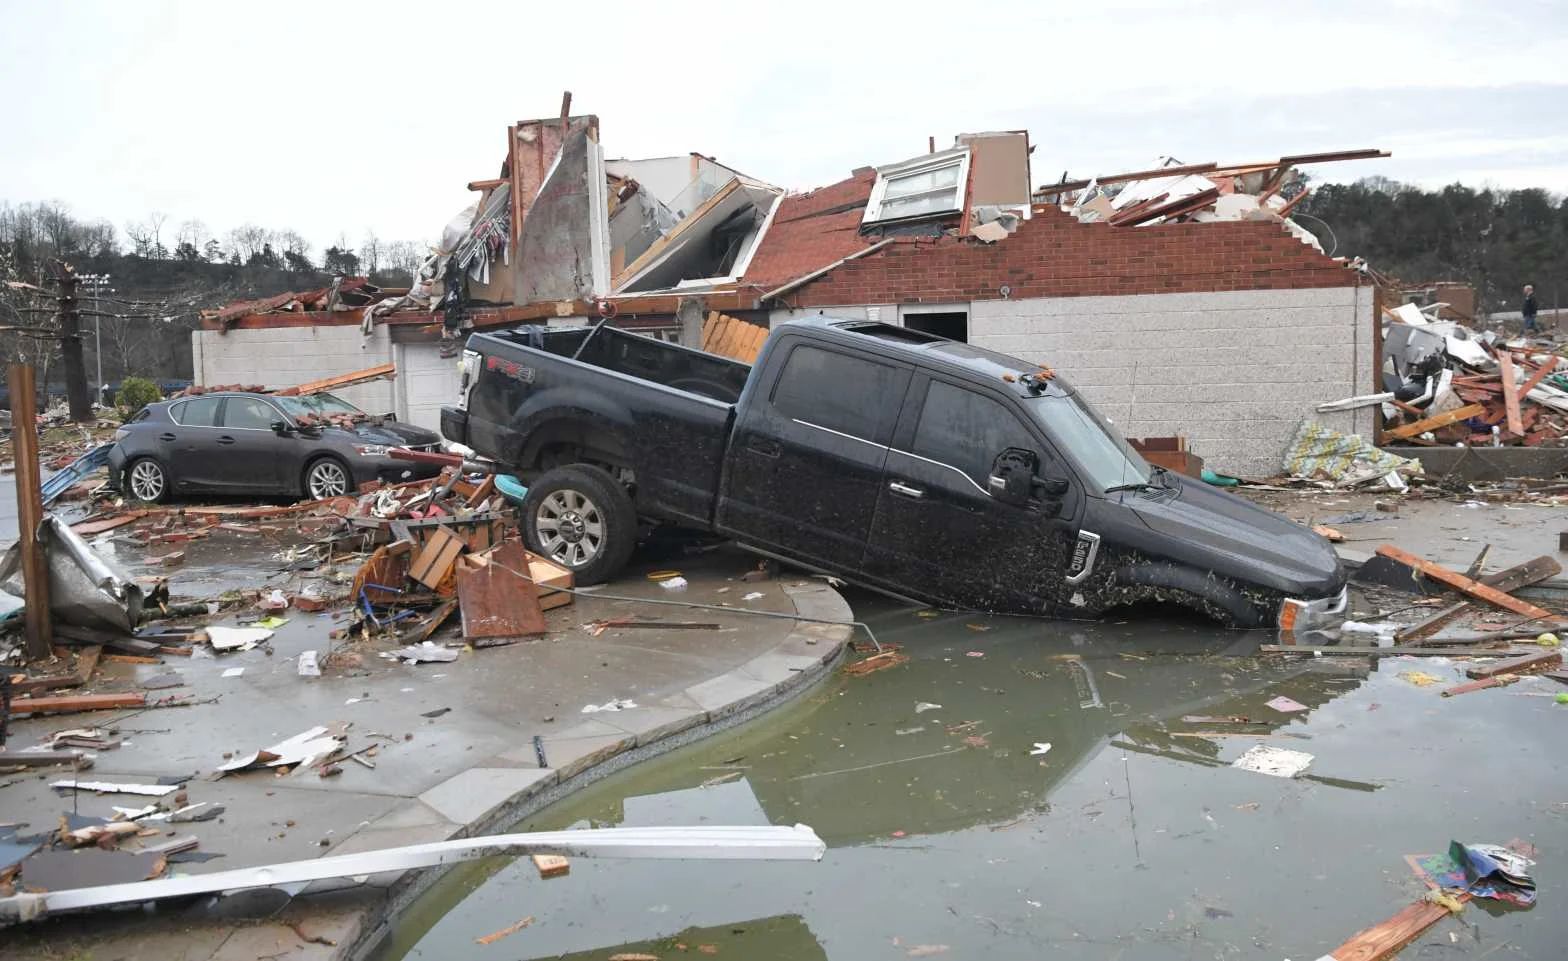 2020 already the deadliest year for U.S. tornadoes since 2011